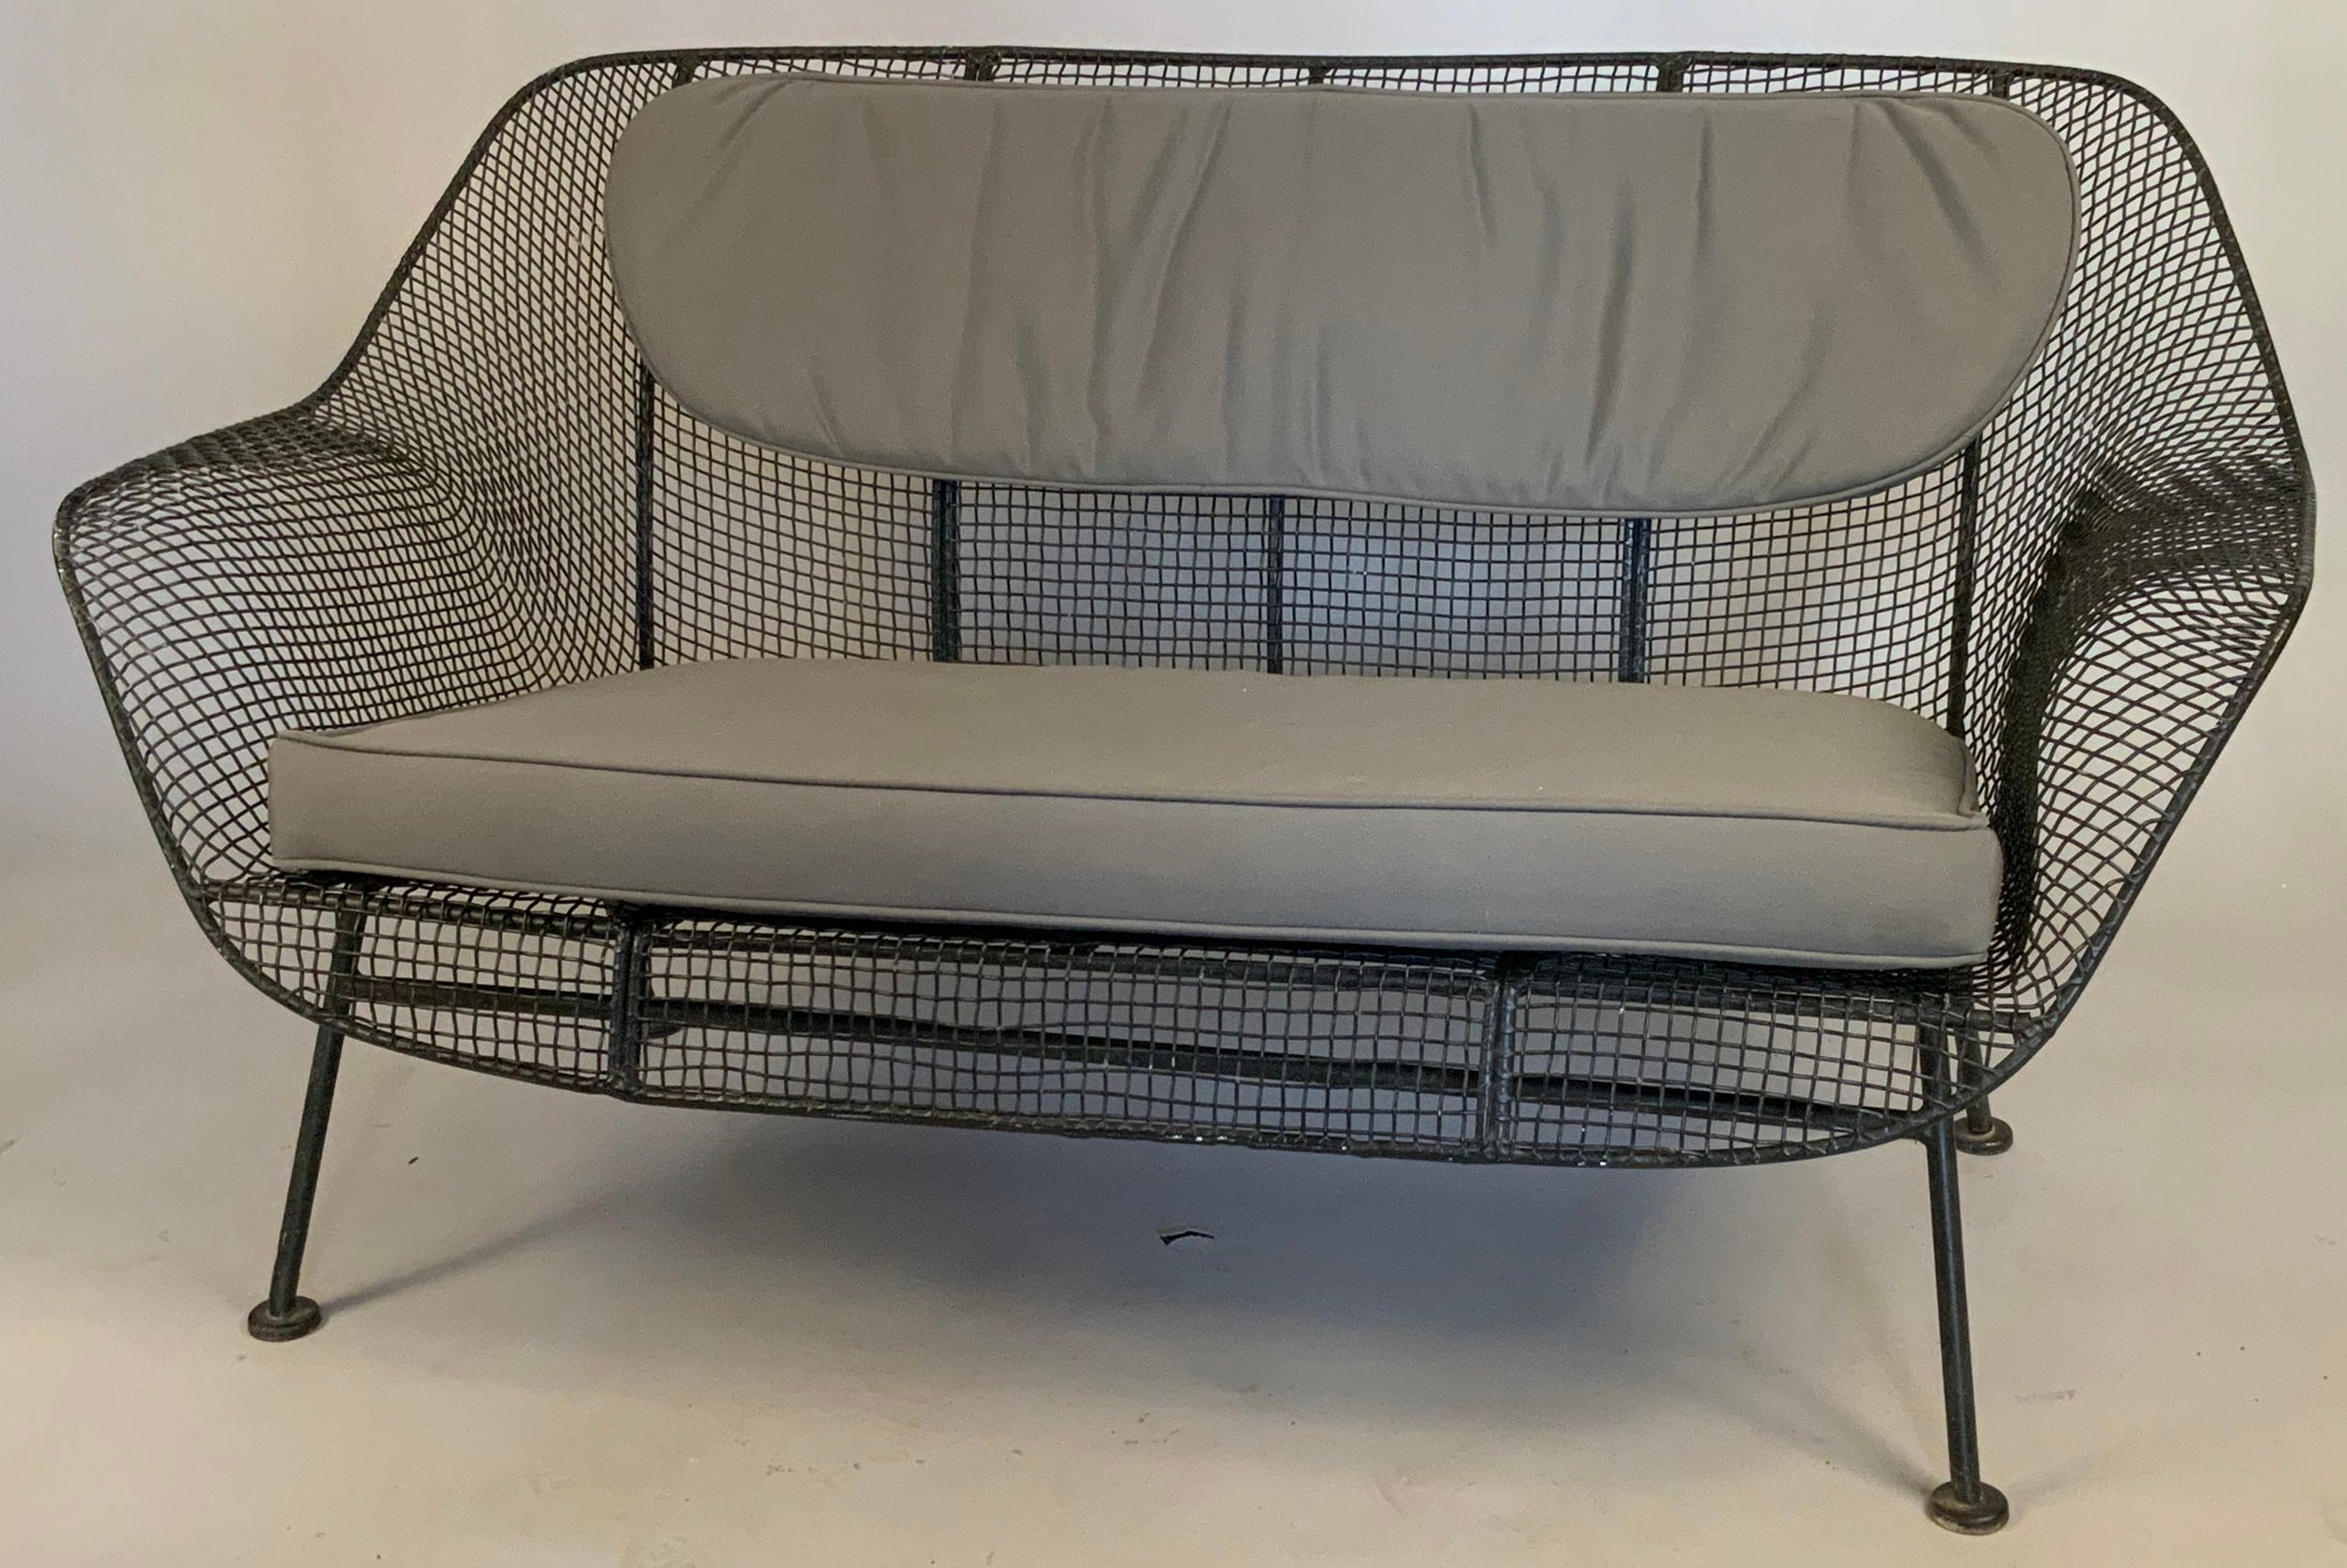 A pair of 1950s wrought iron and steel mesh settees from Russell Woodard's iconic Sculptura series. Beautiful and Classic sculptural design, finished in black, but can be finished in any color you choose. Cushions not included but can be custom